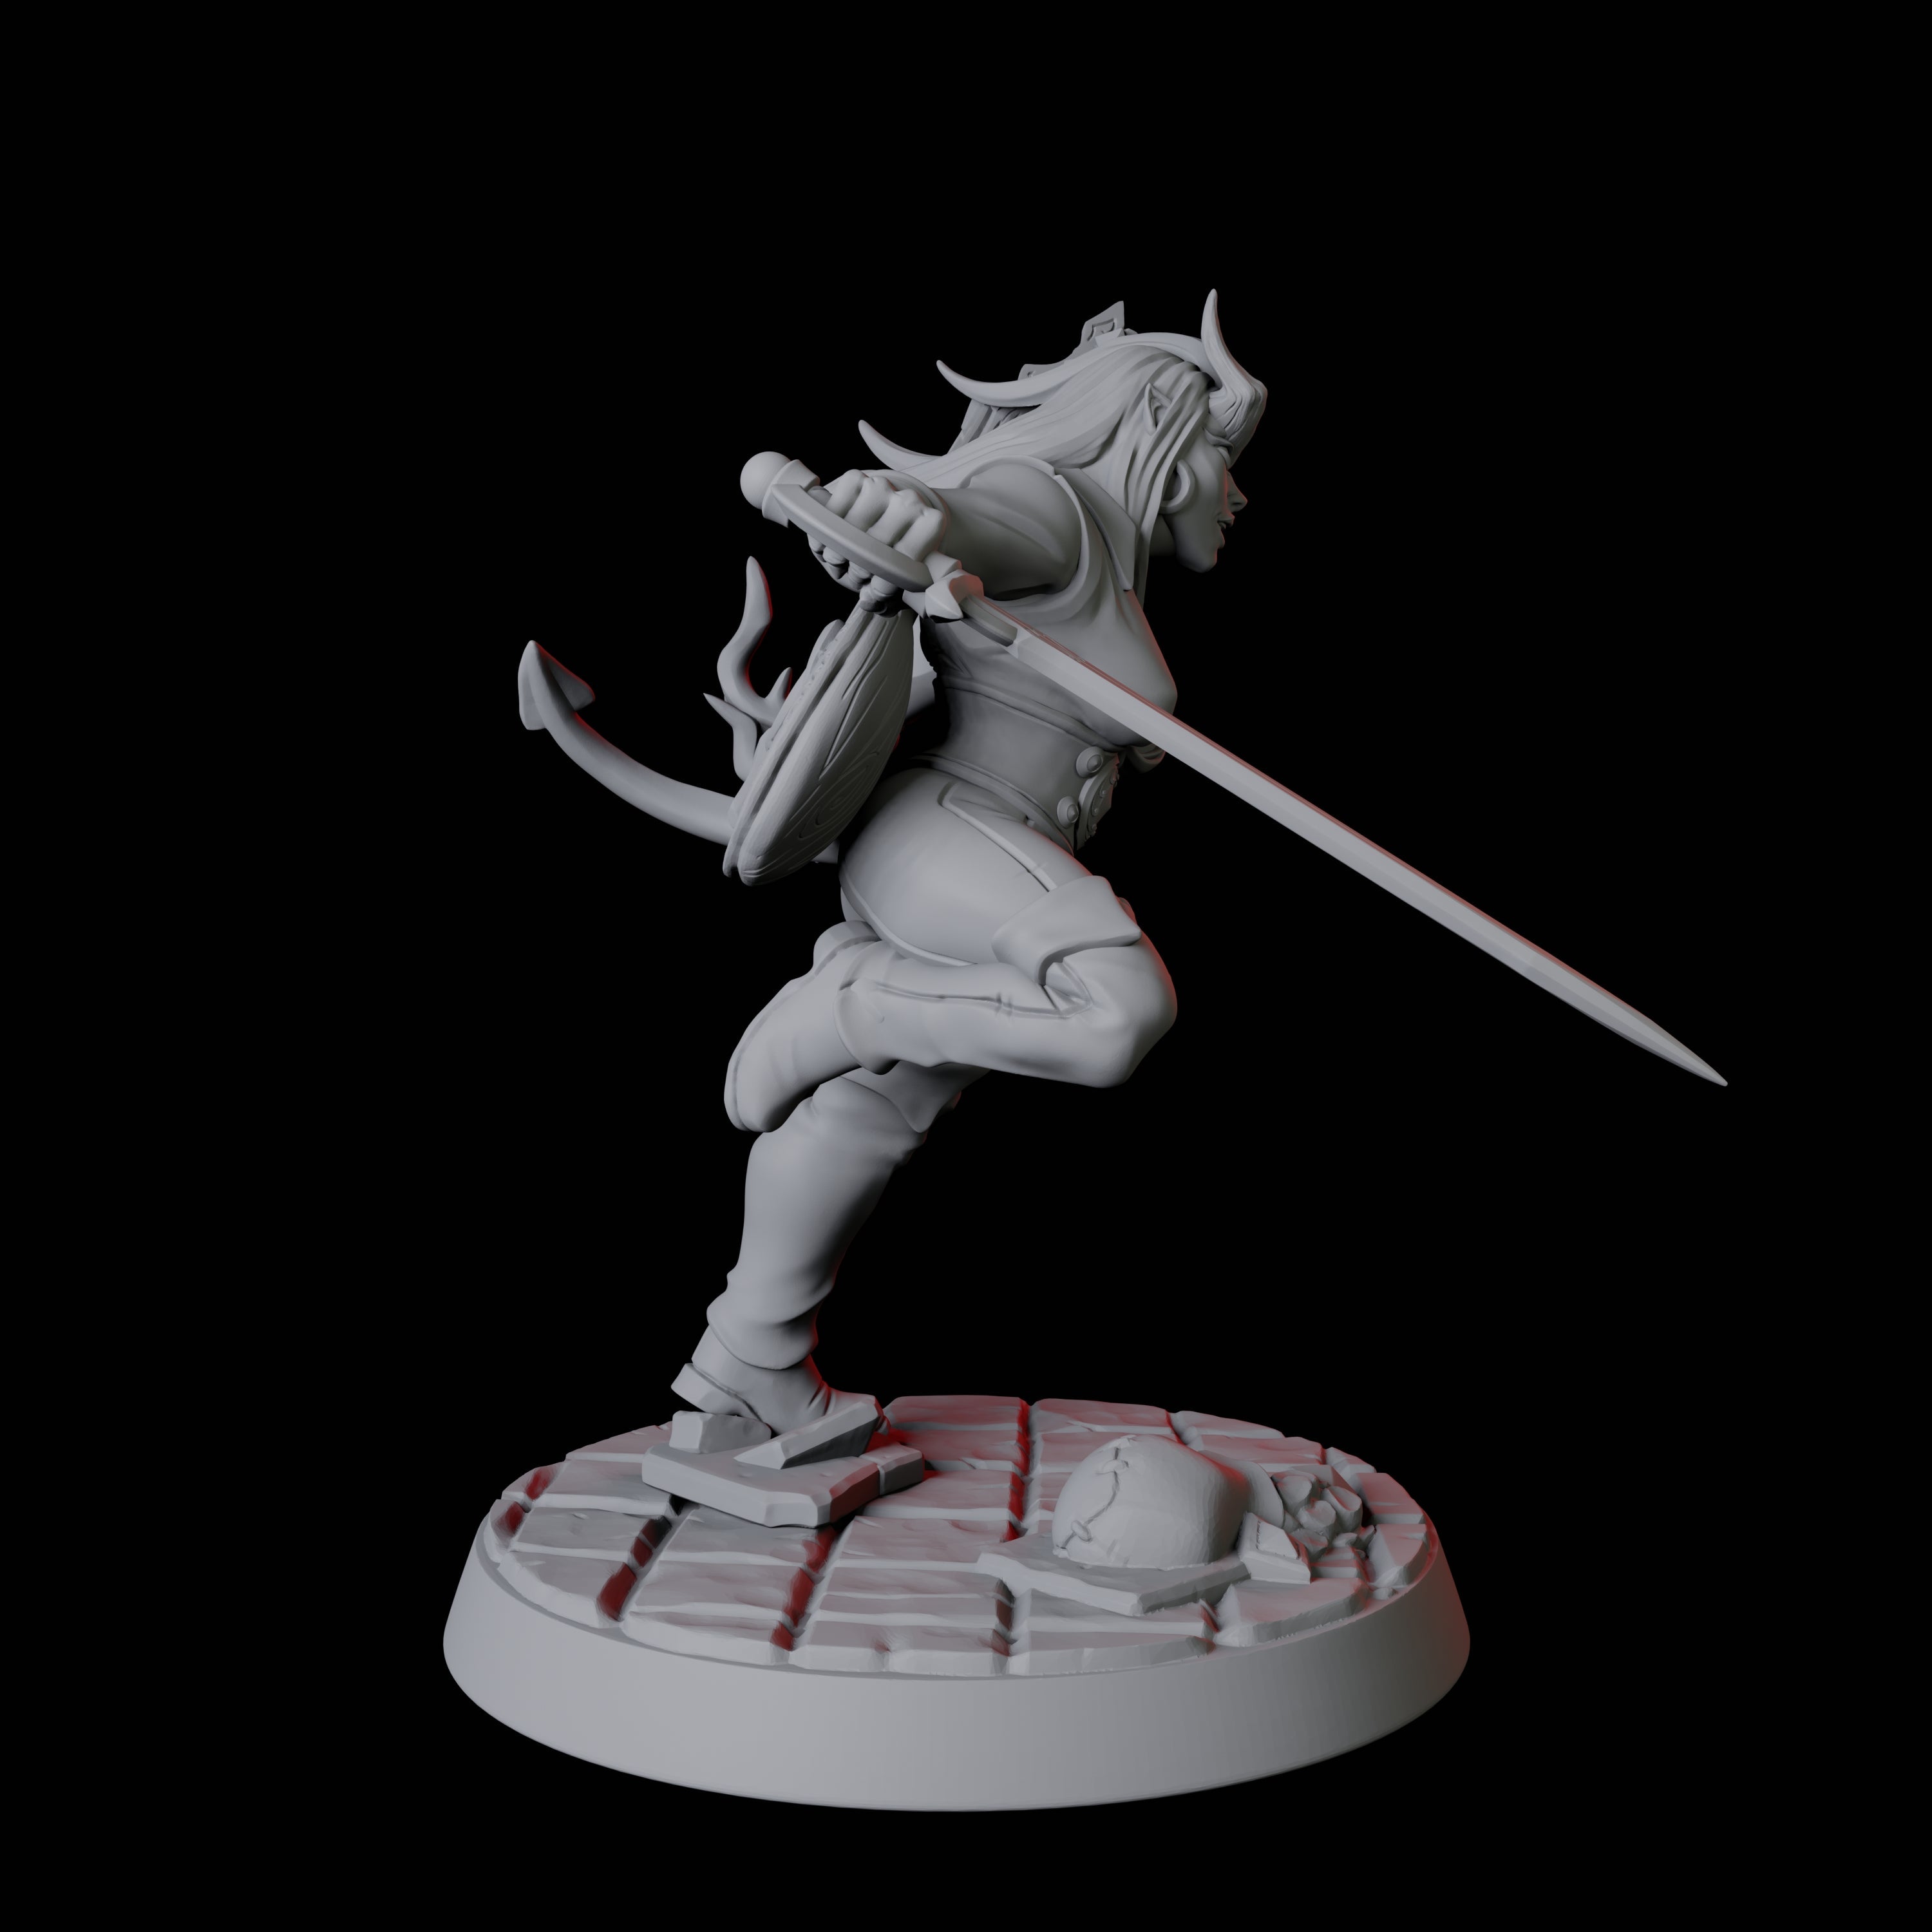 Six Tiefling Tricksters Miniature for Dungeons and Dragons, Pathfinder or other TTRPGs